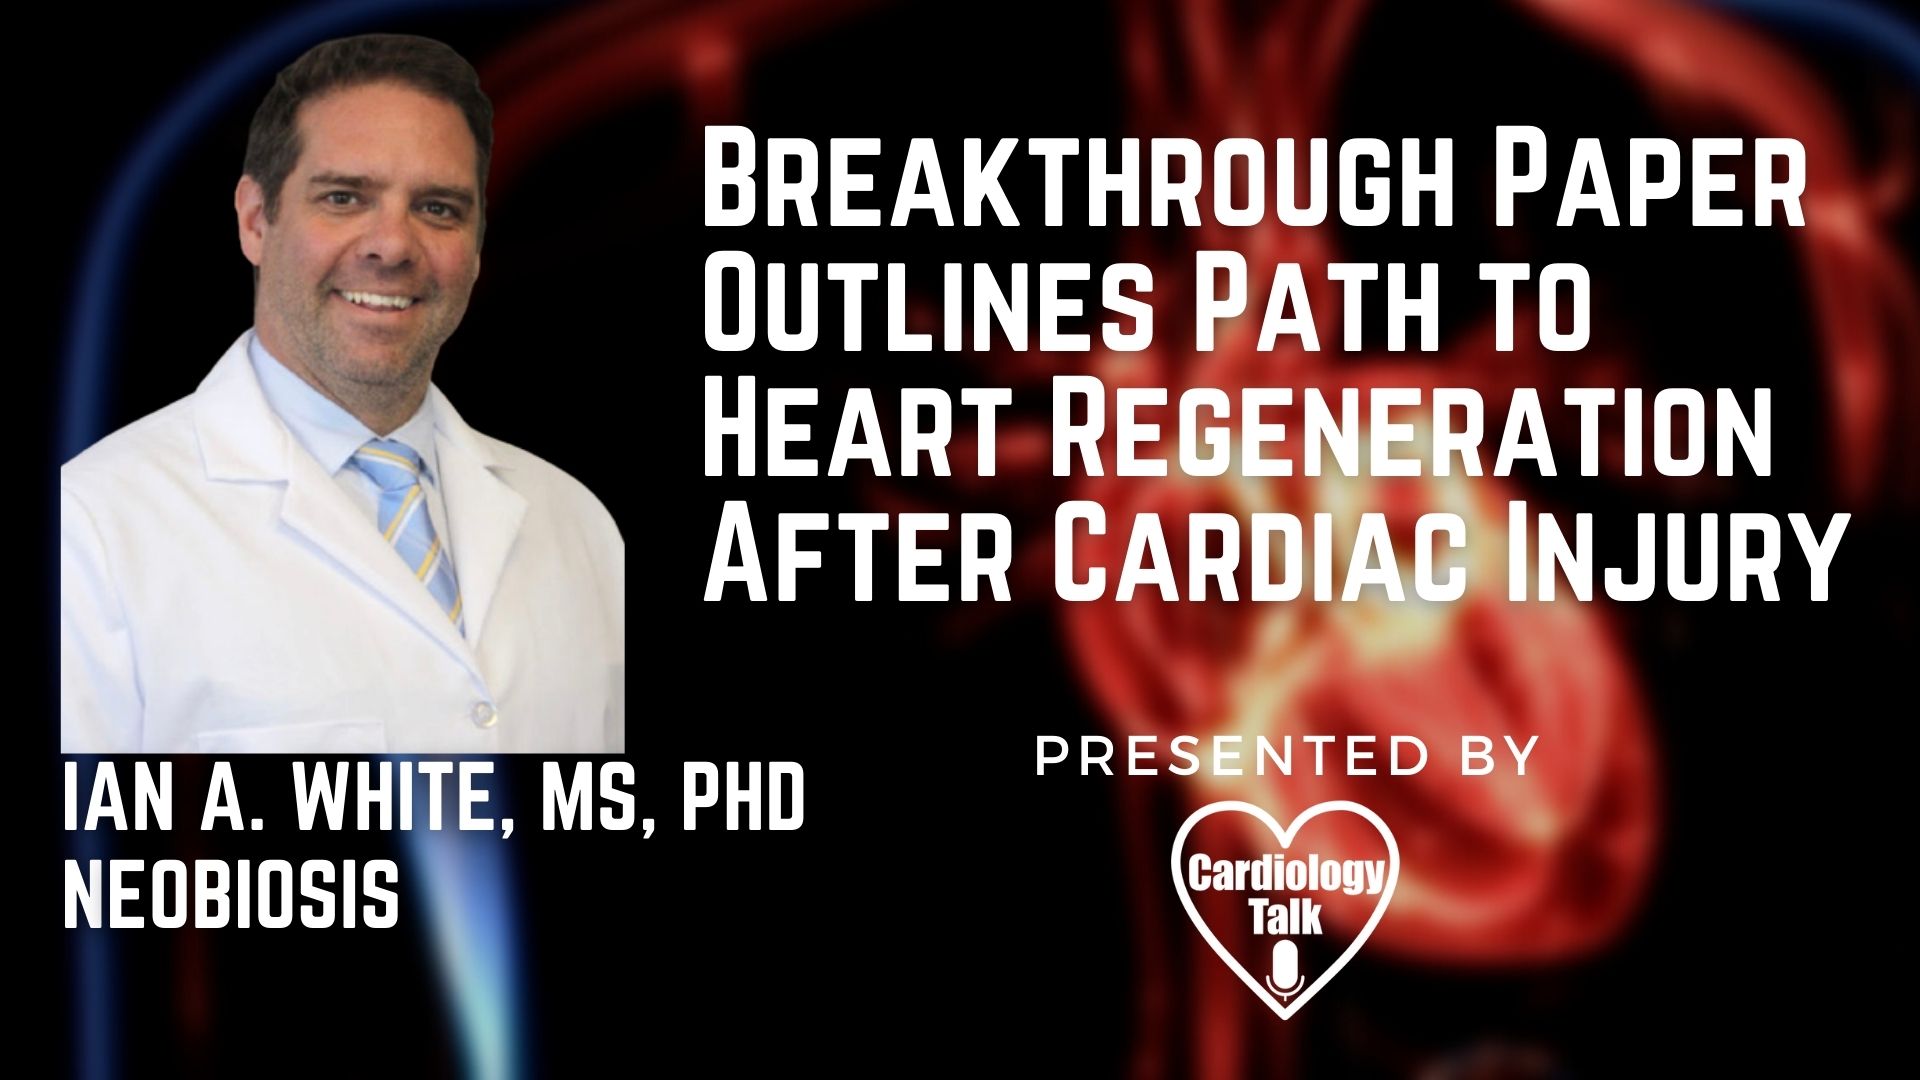 Ian A. White, MS, PhD #Neobiosis #HeartRegeneration #CardiacInjury #Cardiology #Heart #Research Breakthrough Paper Outlines Path to Heart Regeneration After Cardiac Injury